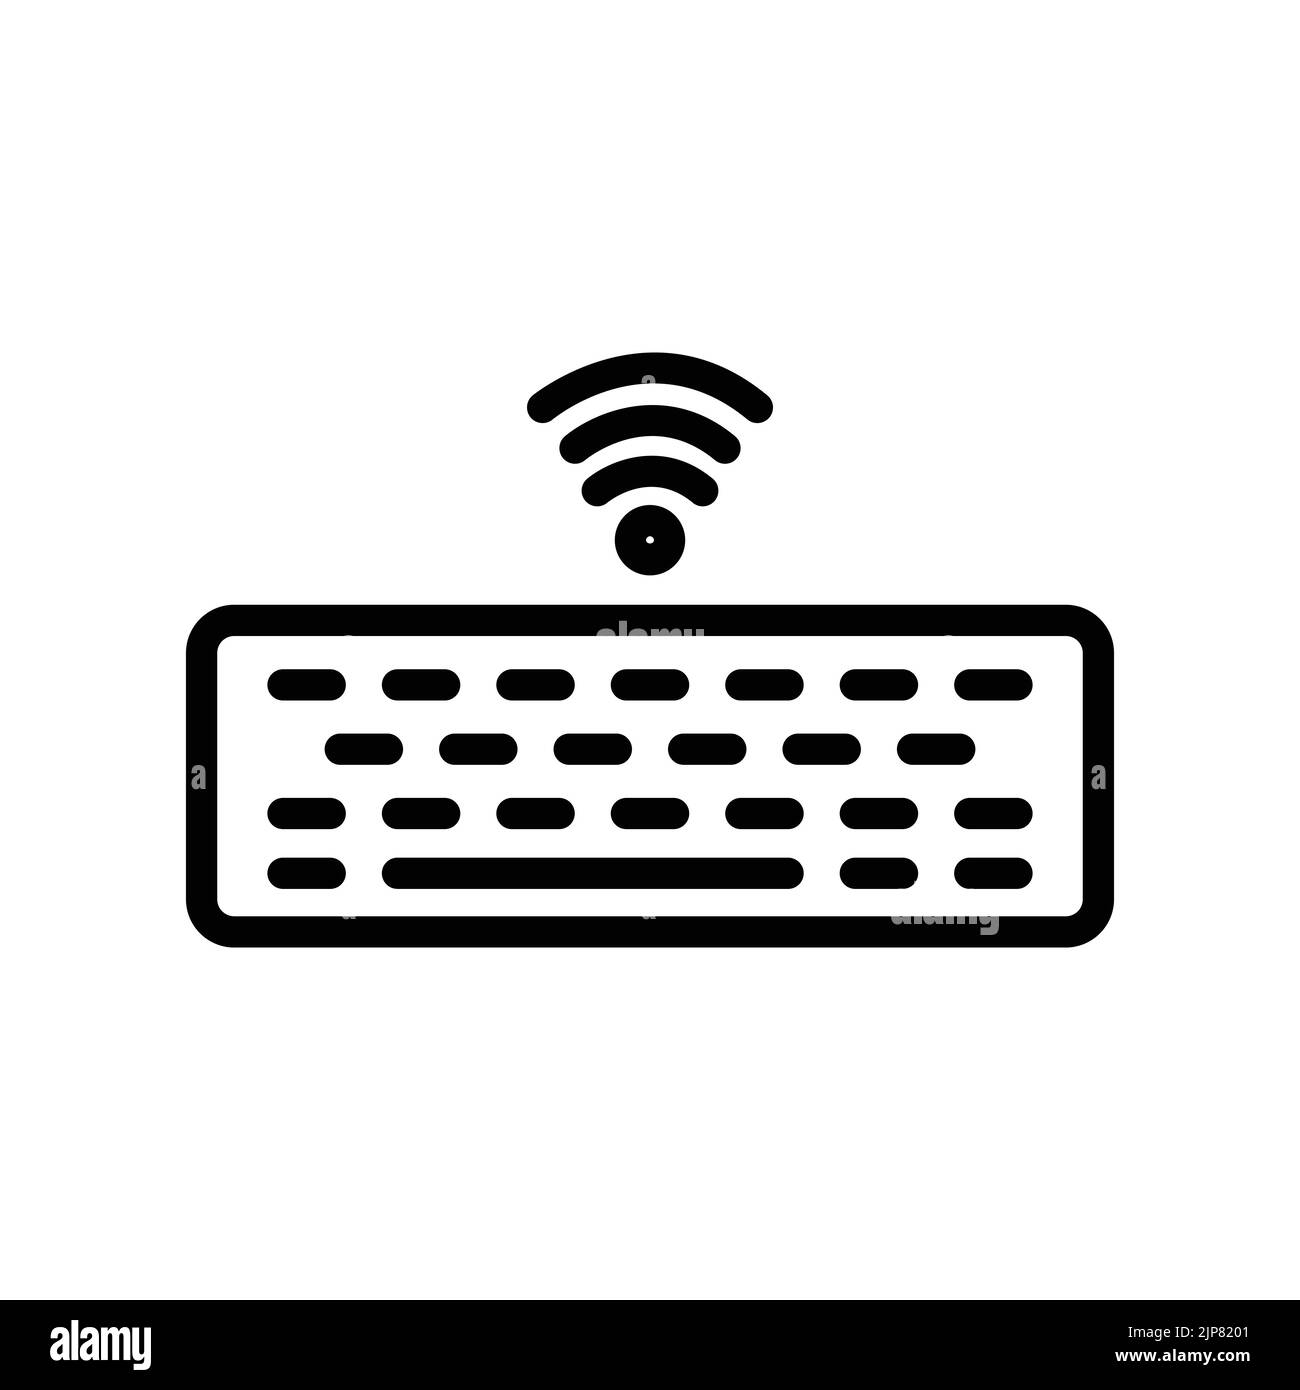 Keyboard icon with signal. icon related to technology, smart device. line icon style. Simple design editable Stock Vector